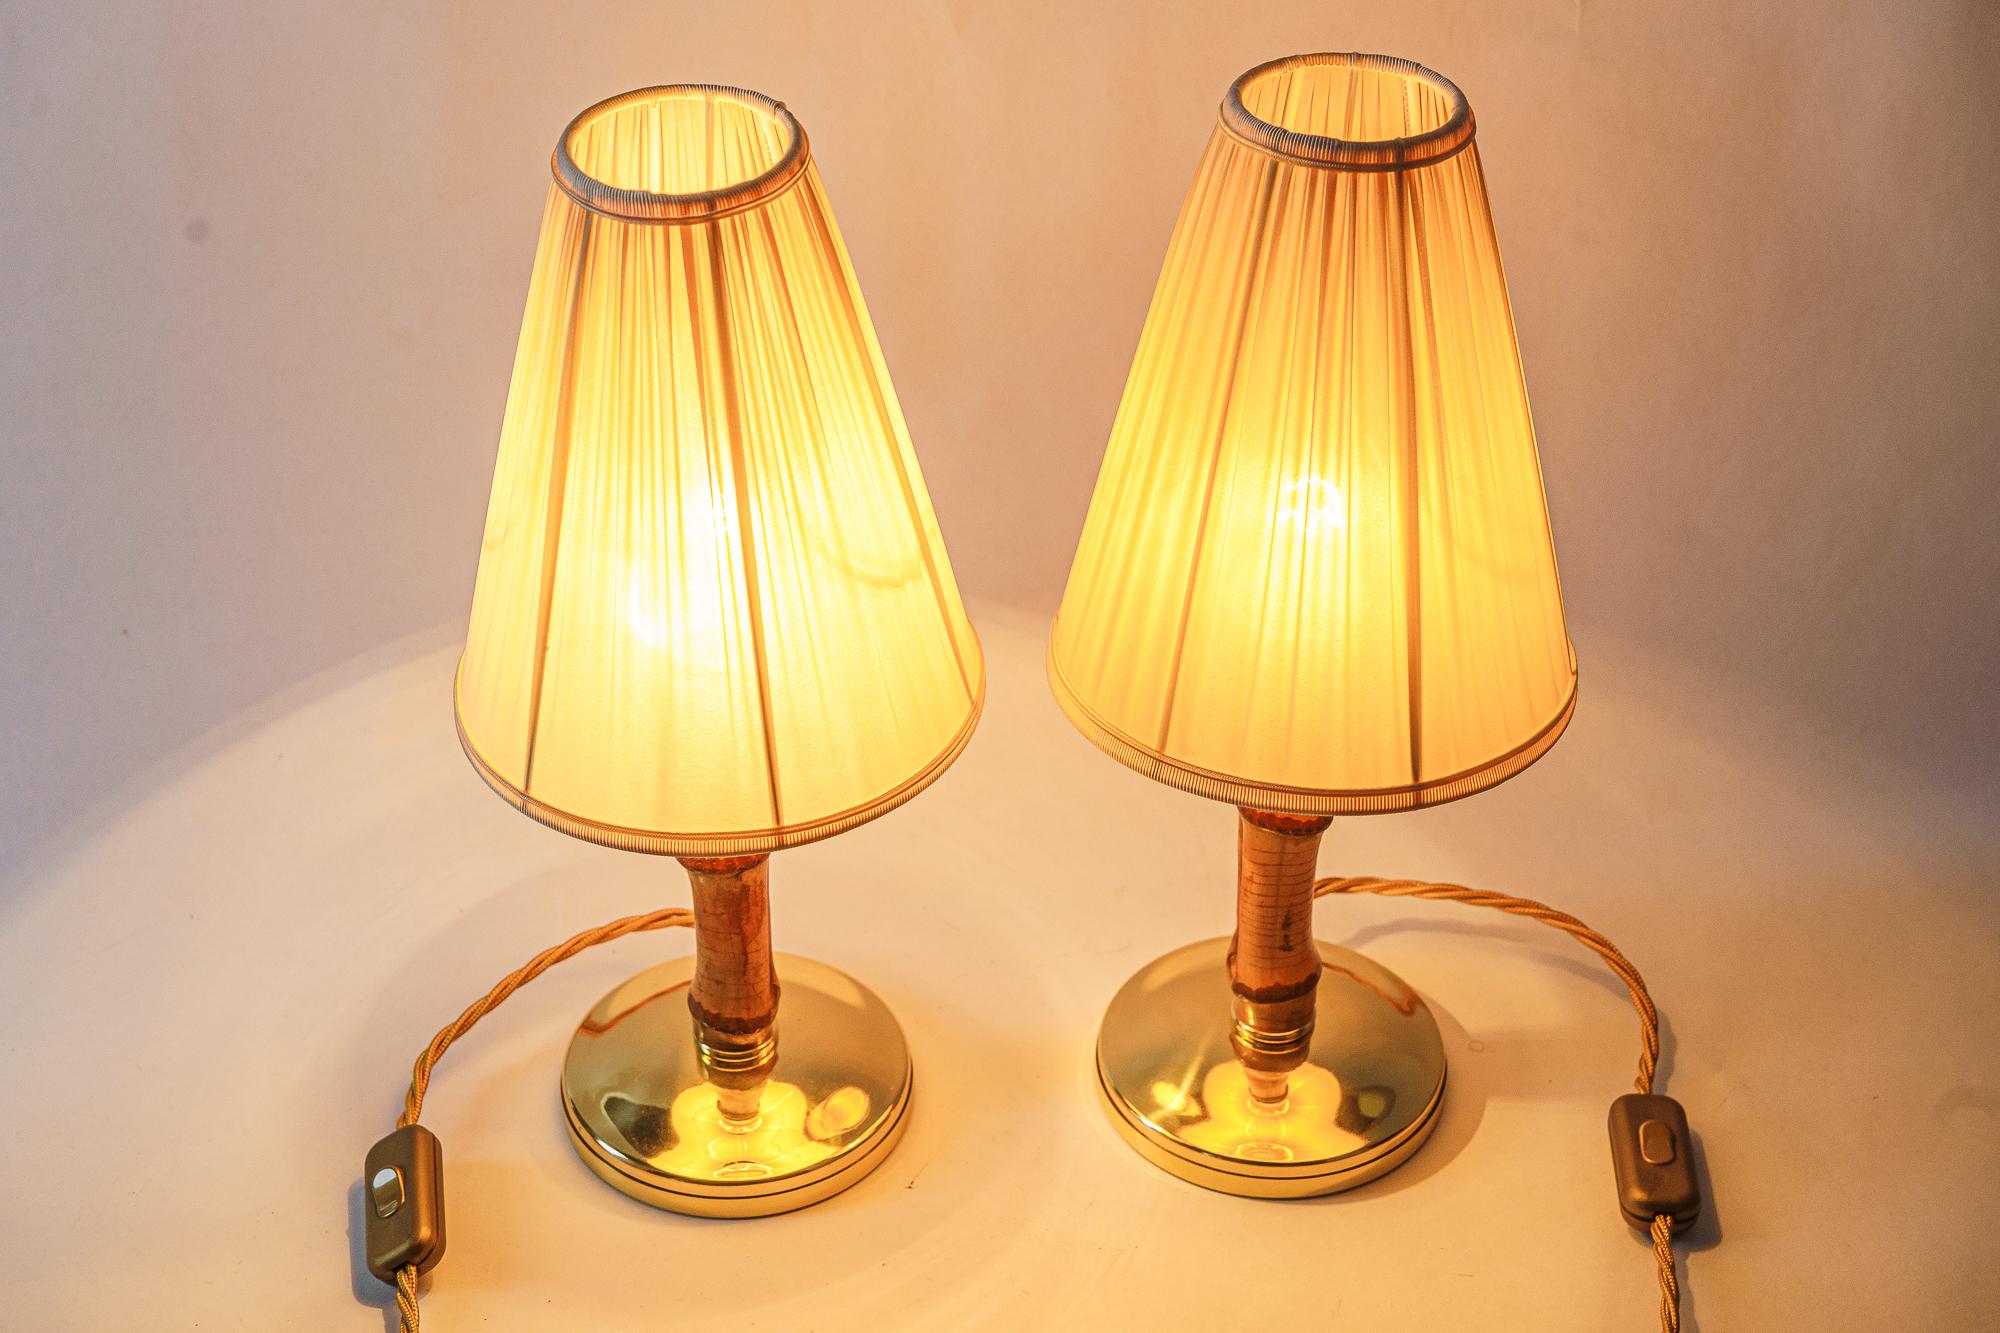 Mid-20th Century 2 Rupert Nikoll Bamboo Table Lamps with Fabric Shades Austria Around 1950s For Sale